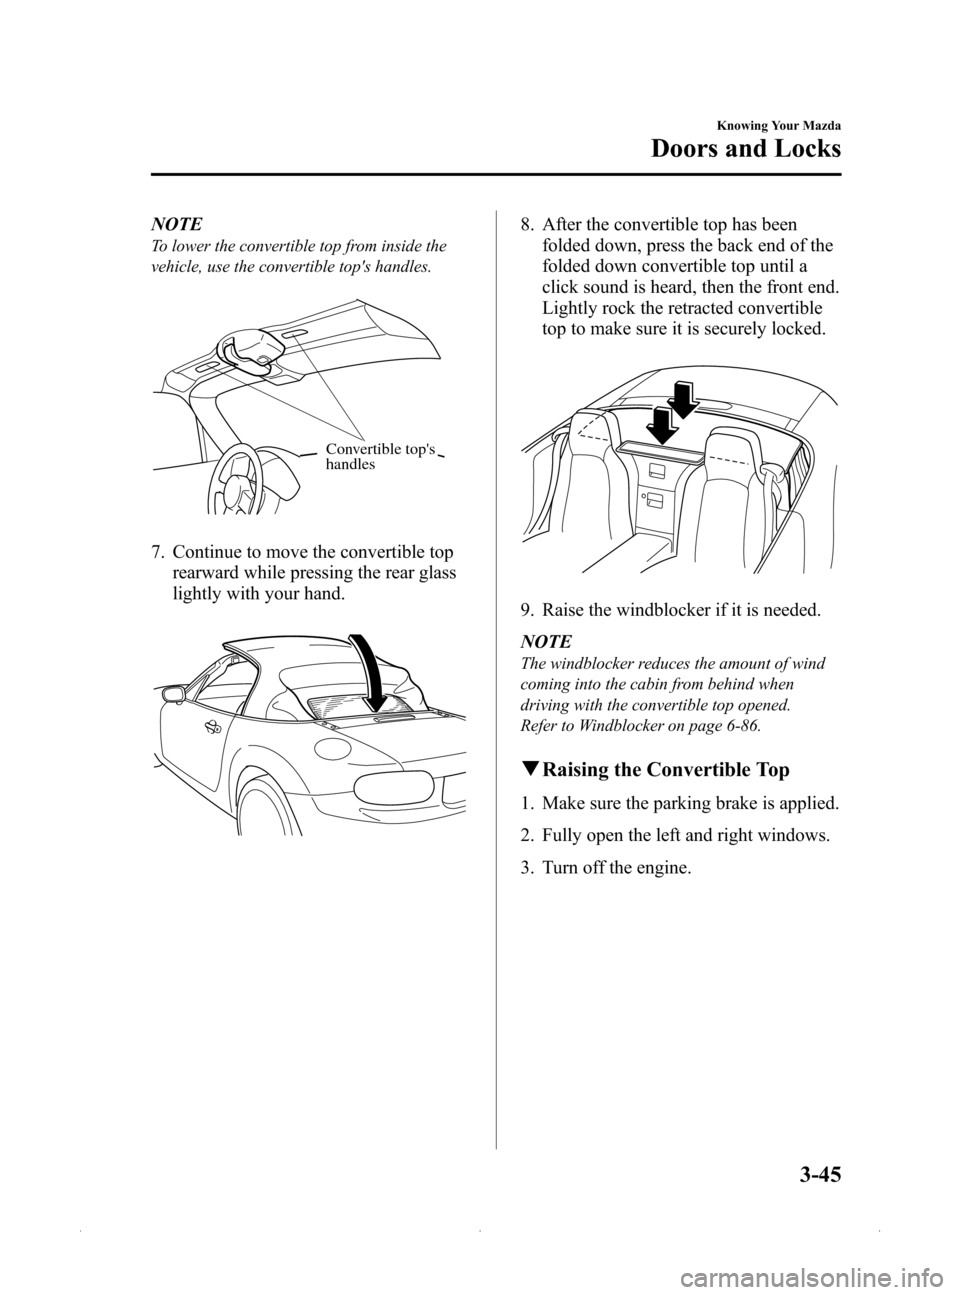 MAZDA MODEL MX-5 2015  Owners Manual (in English) Black plate (99,1)
NOTE
To lower the convertible top from inside the
vehicle, use the convertible tops handles.
Convertible tops 
handles
7. Continue to move the convertible top
rearward while press